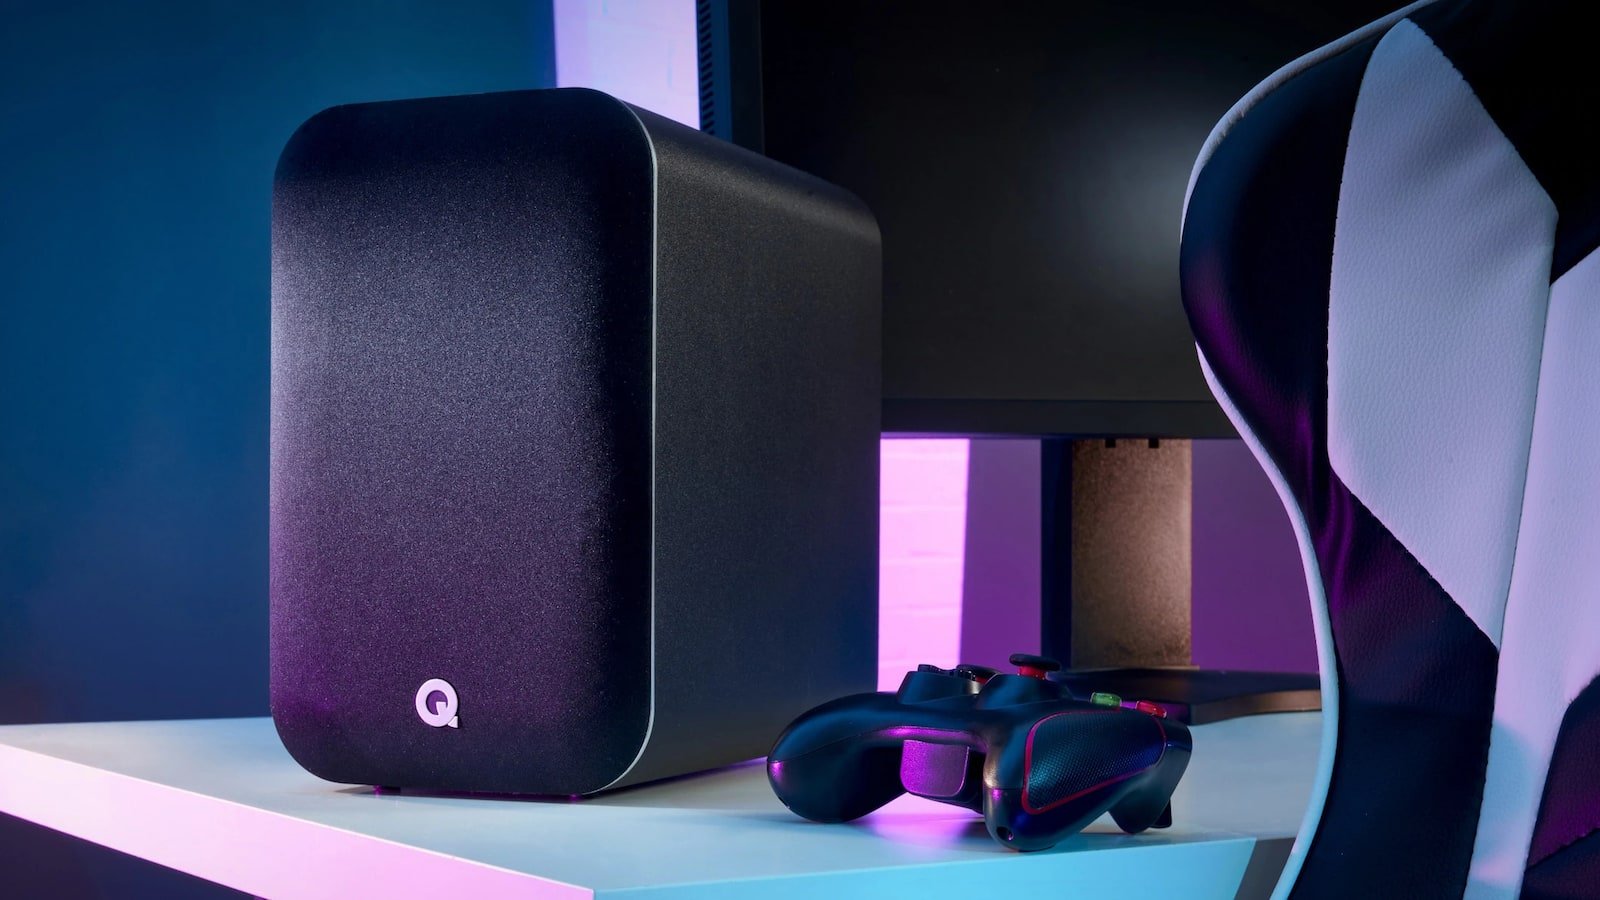 Q Acoustics M20 HD wireless music system has many inputs for gaming consoles, TVs, & more